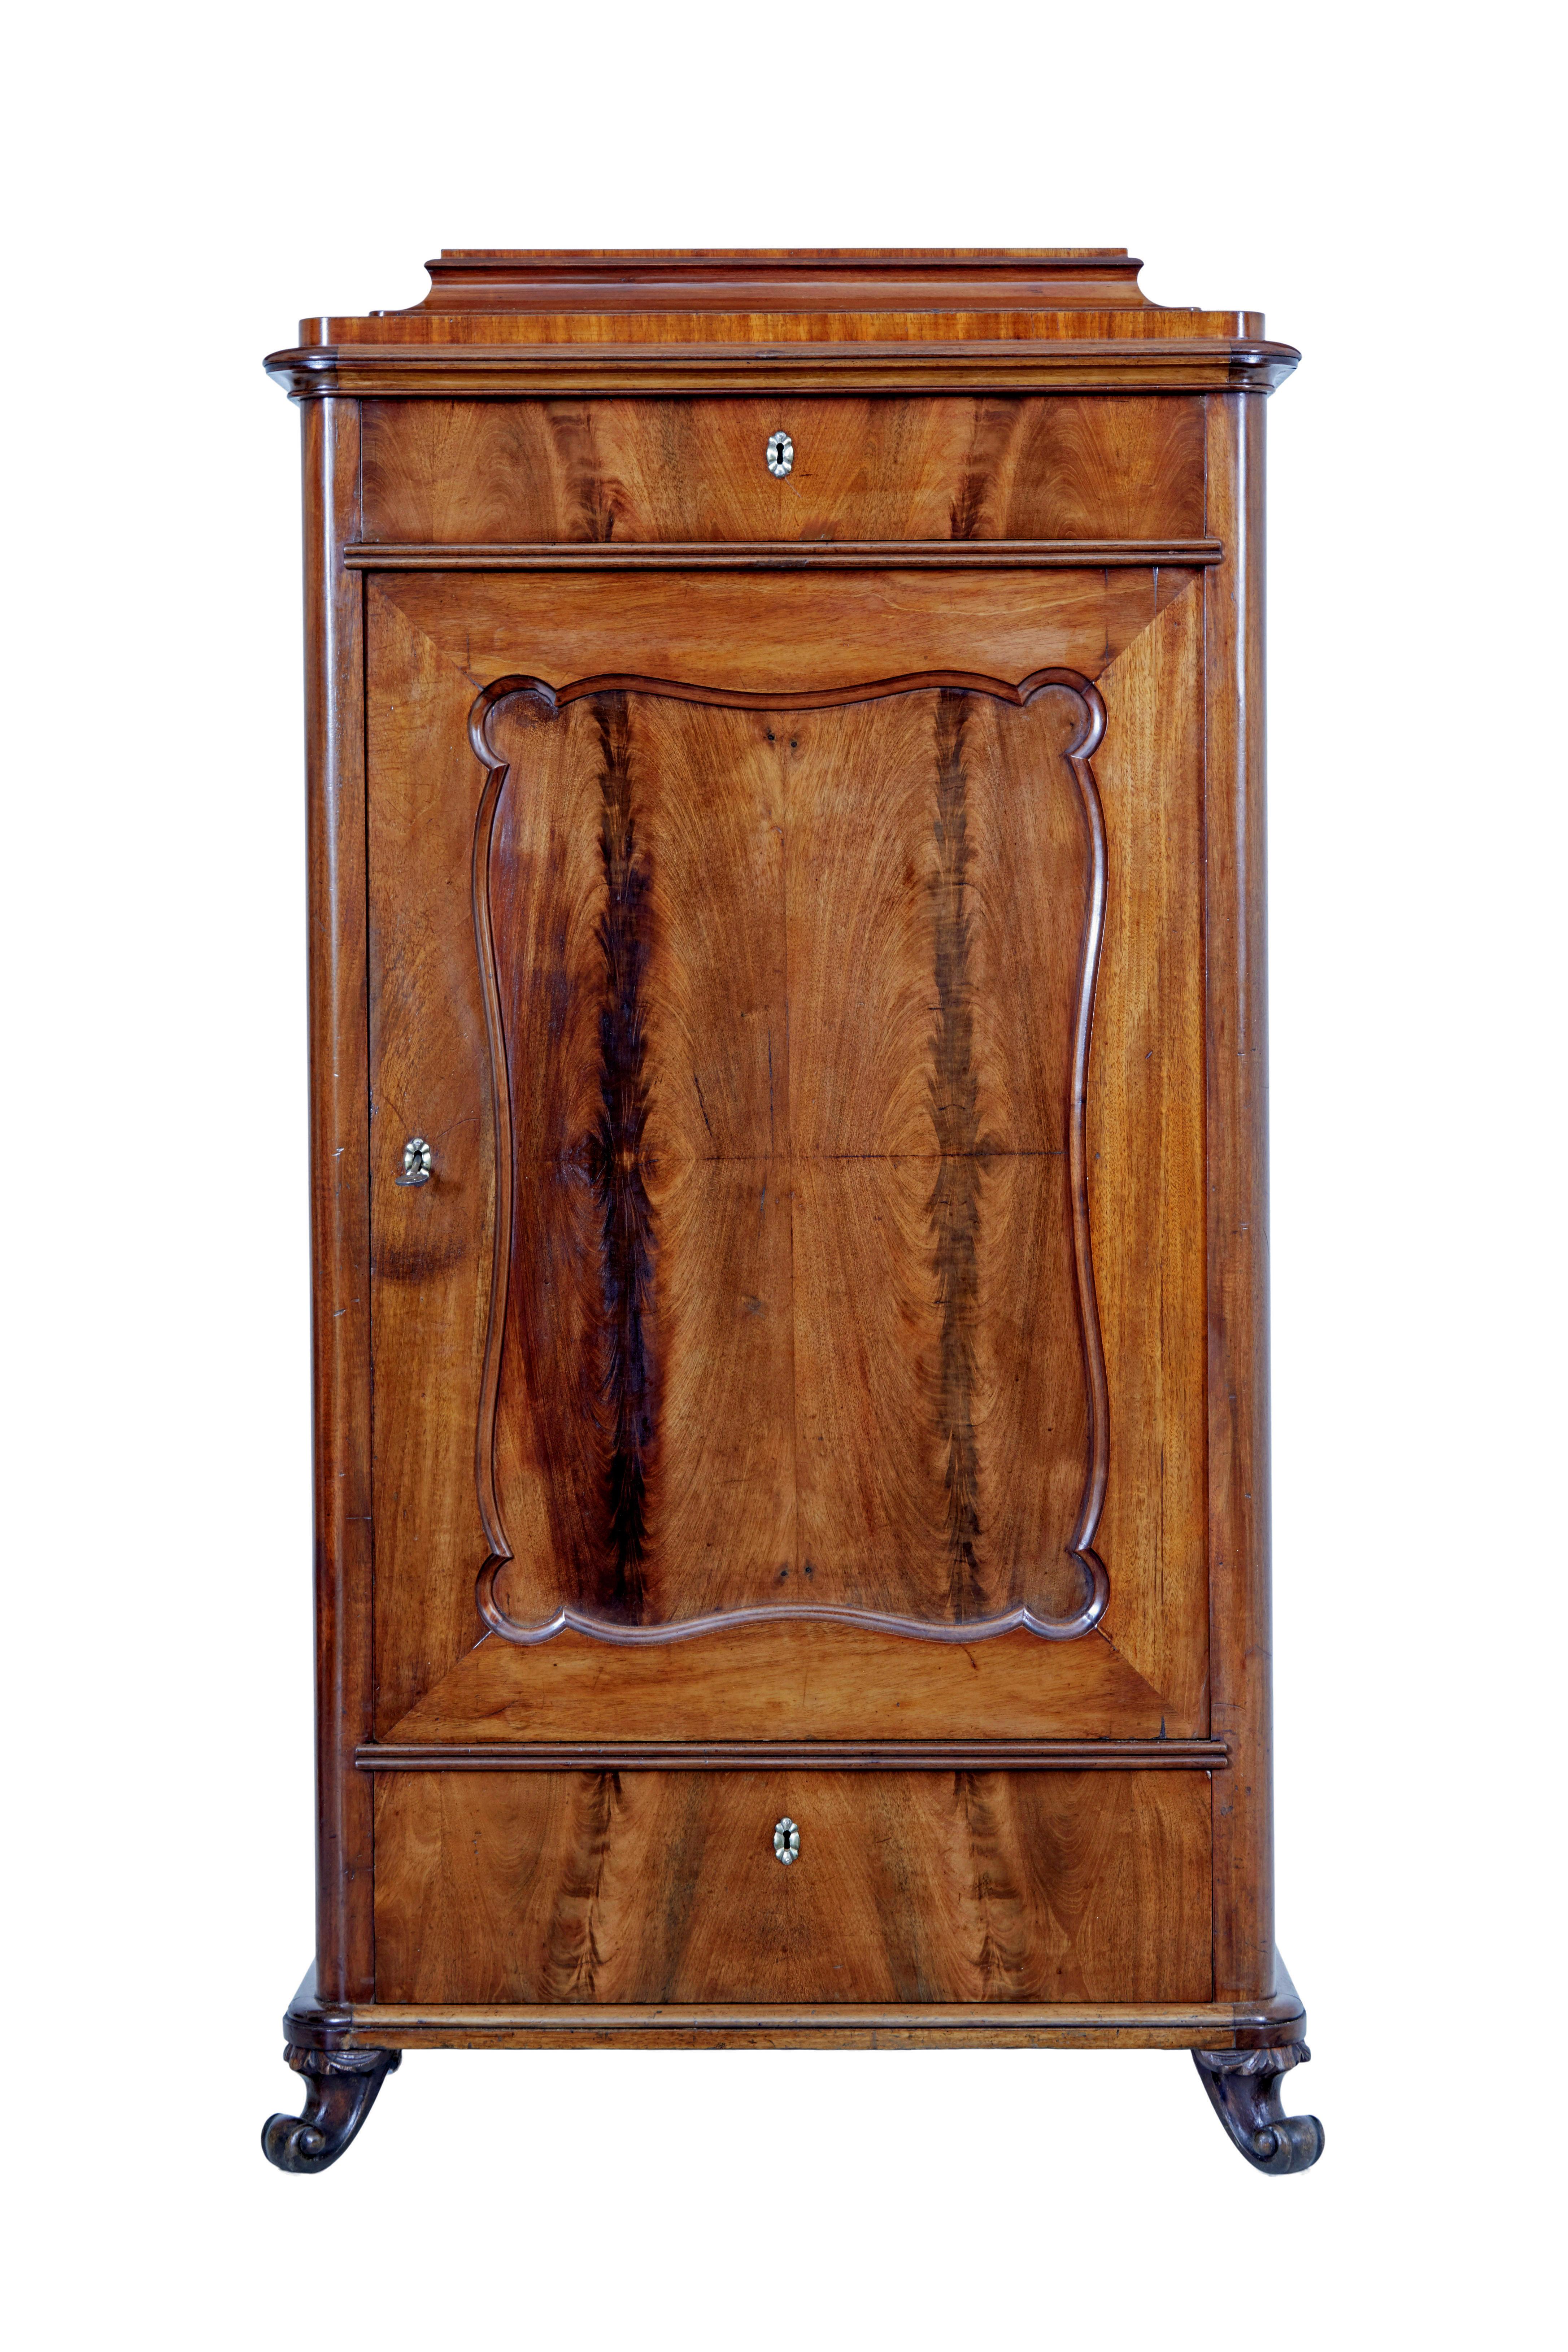 Mid 19th century mahogany caddy top cupboard circa 1860.

Elegant flame mahogany 1 piece cupboard.    Layered caddy top which can be removed, single drawer below the top surface.  Main door veneered in flame mahogany in a cartouche shaped panel,